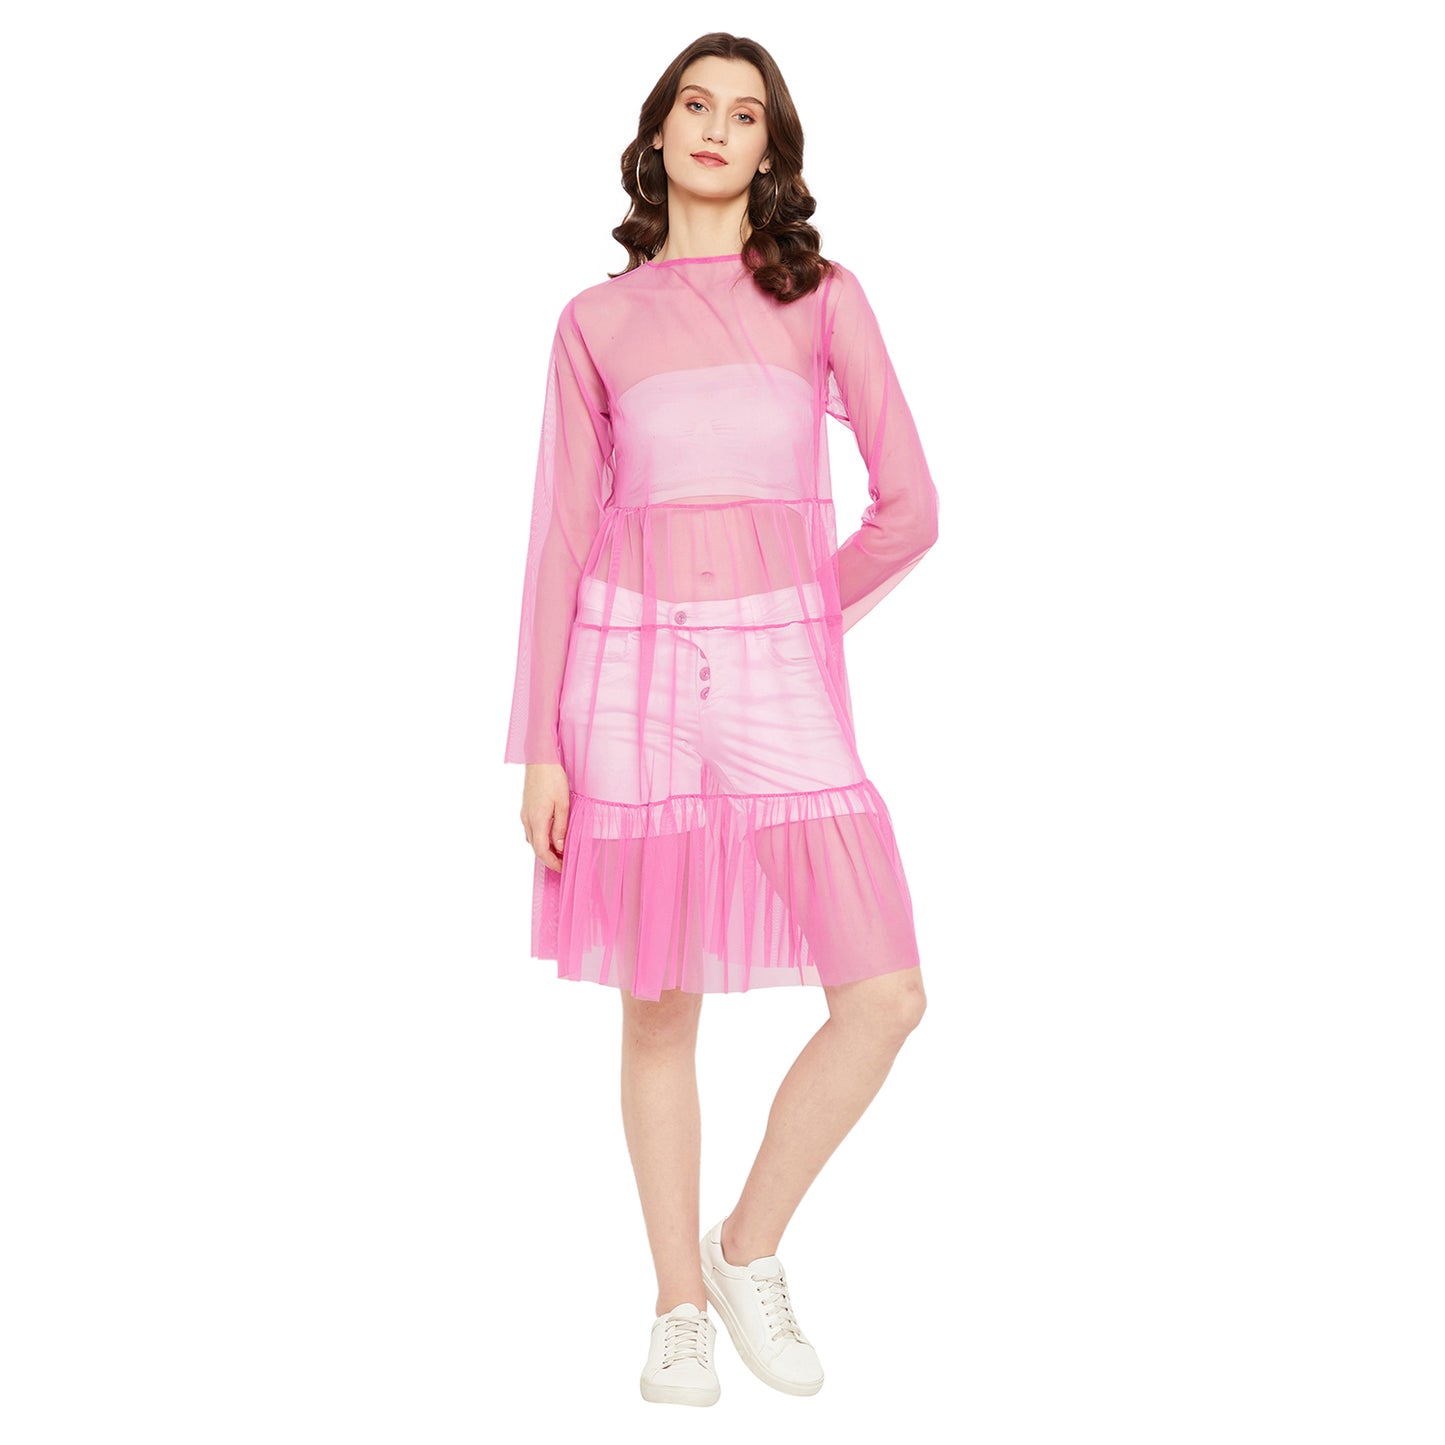 LY2 Fuschia Net Dress with Bell Sleeves